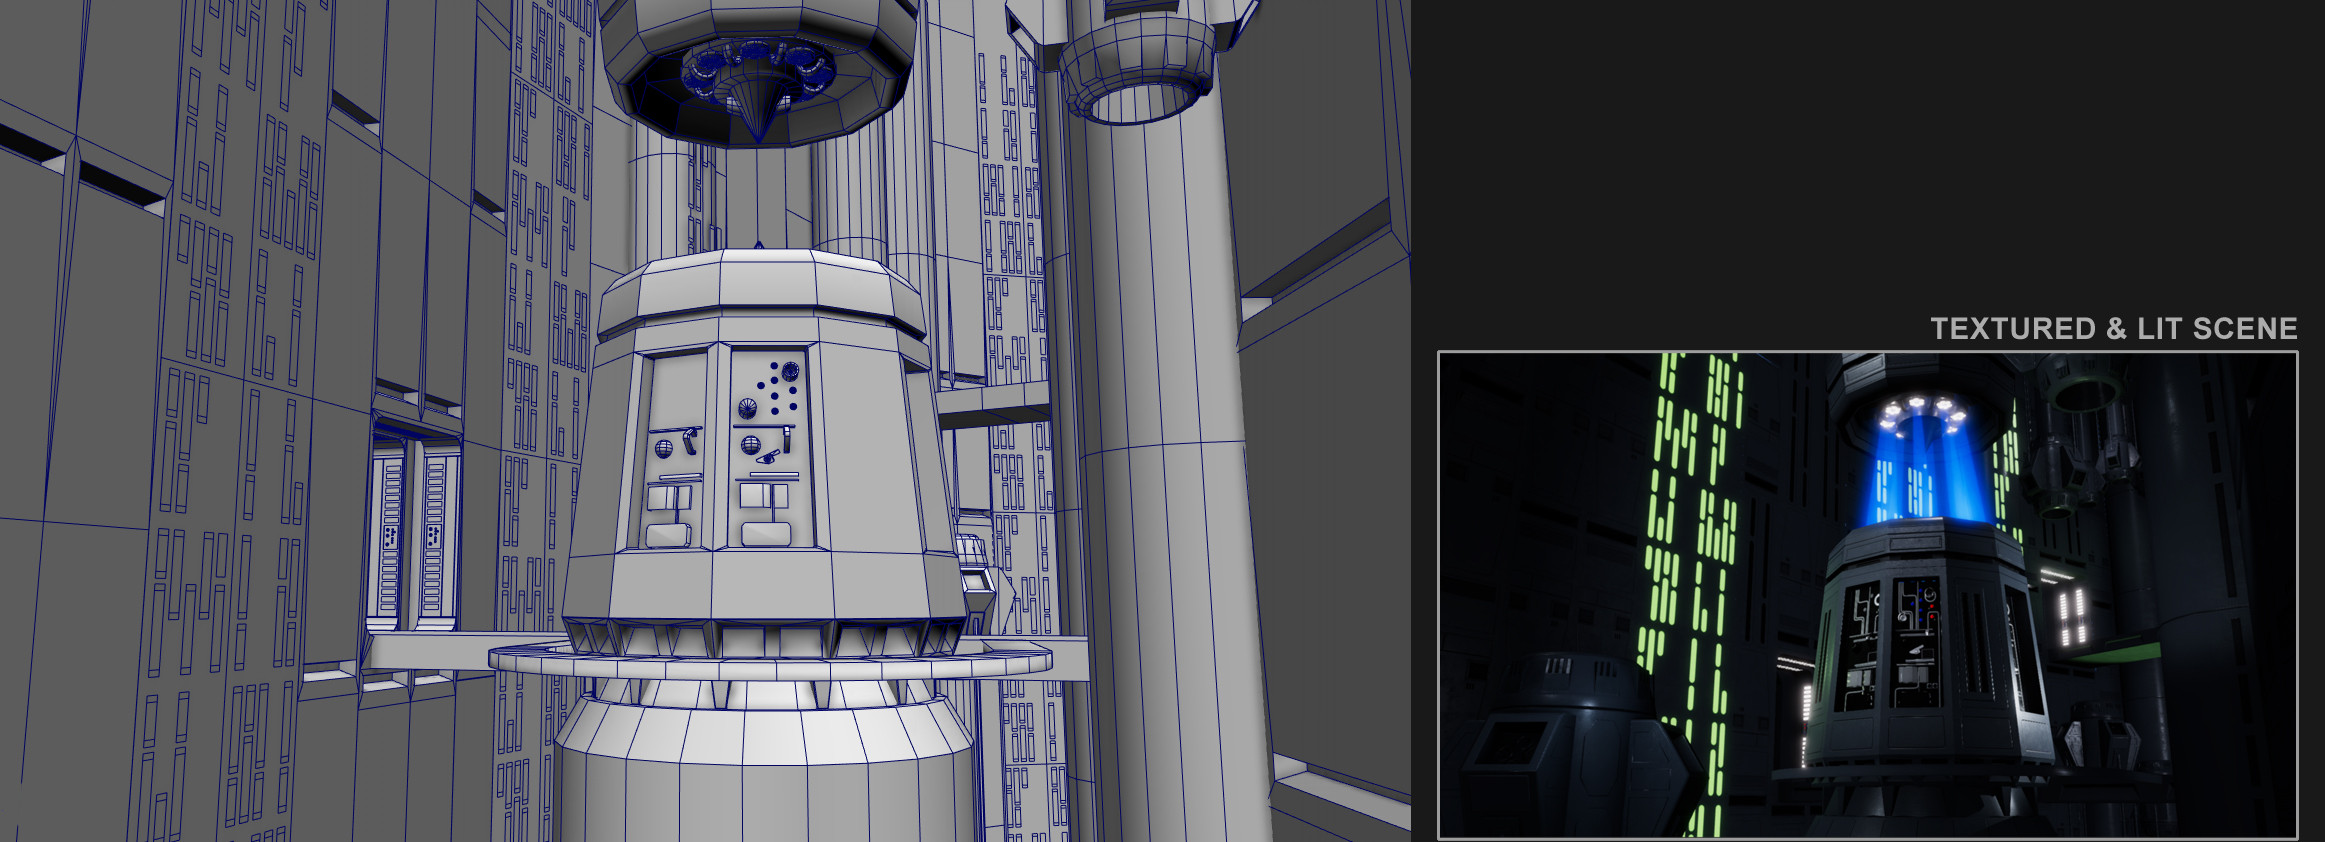 Wireframe on the left, Unity screenshot of the textured and lit geometry on the right.